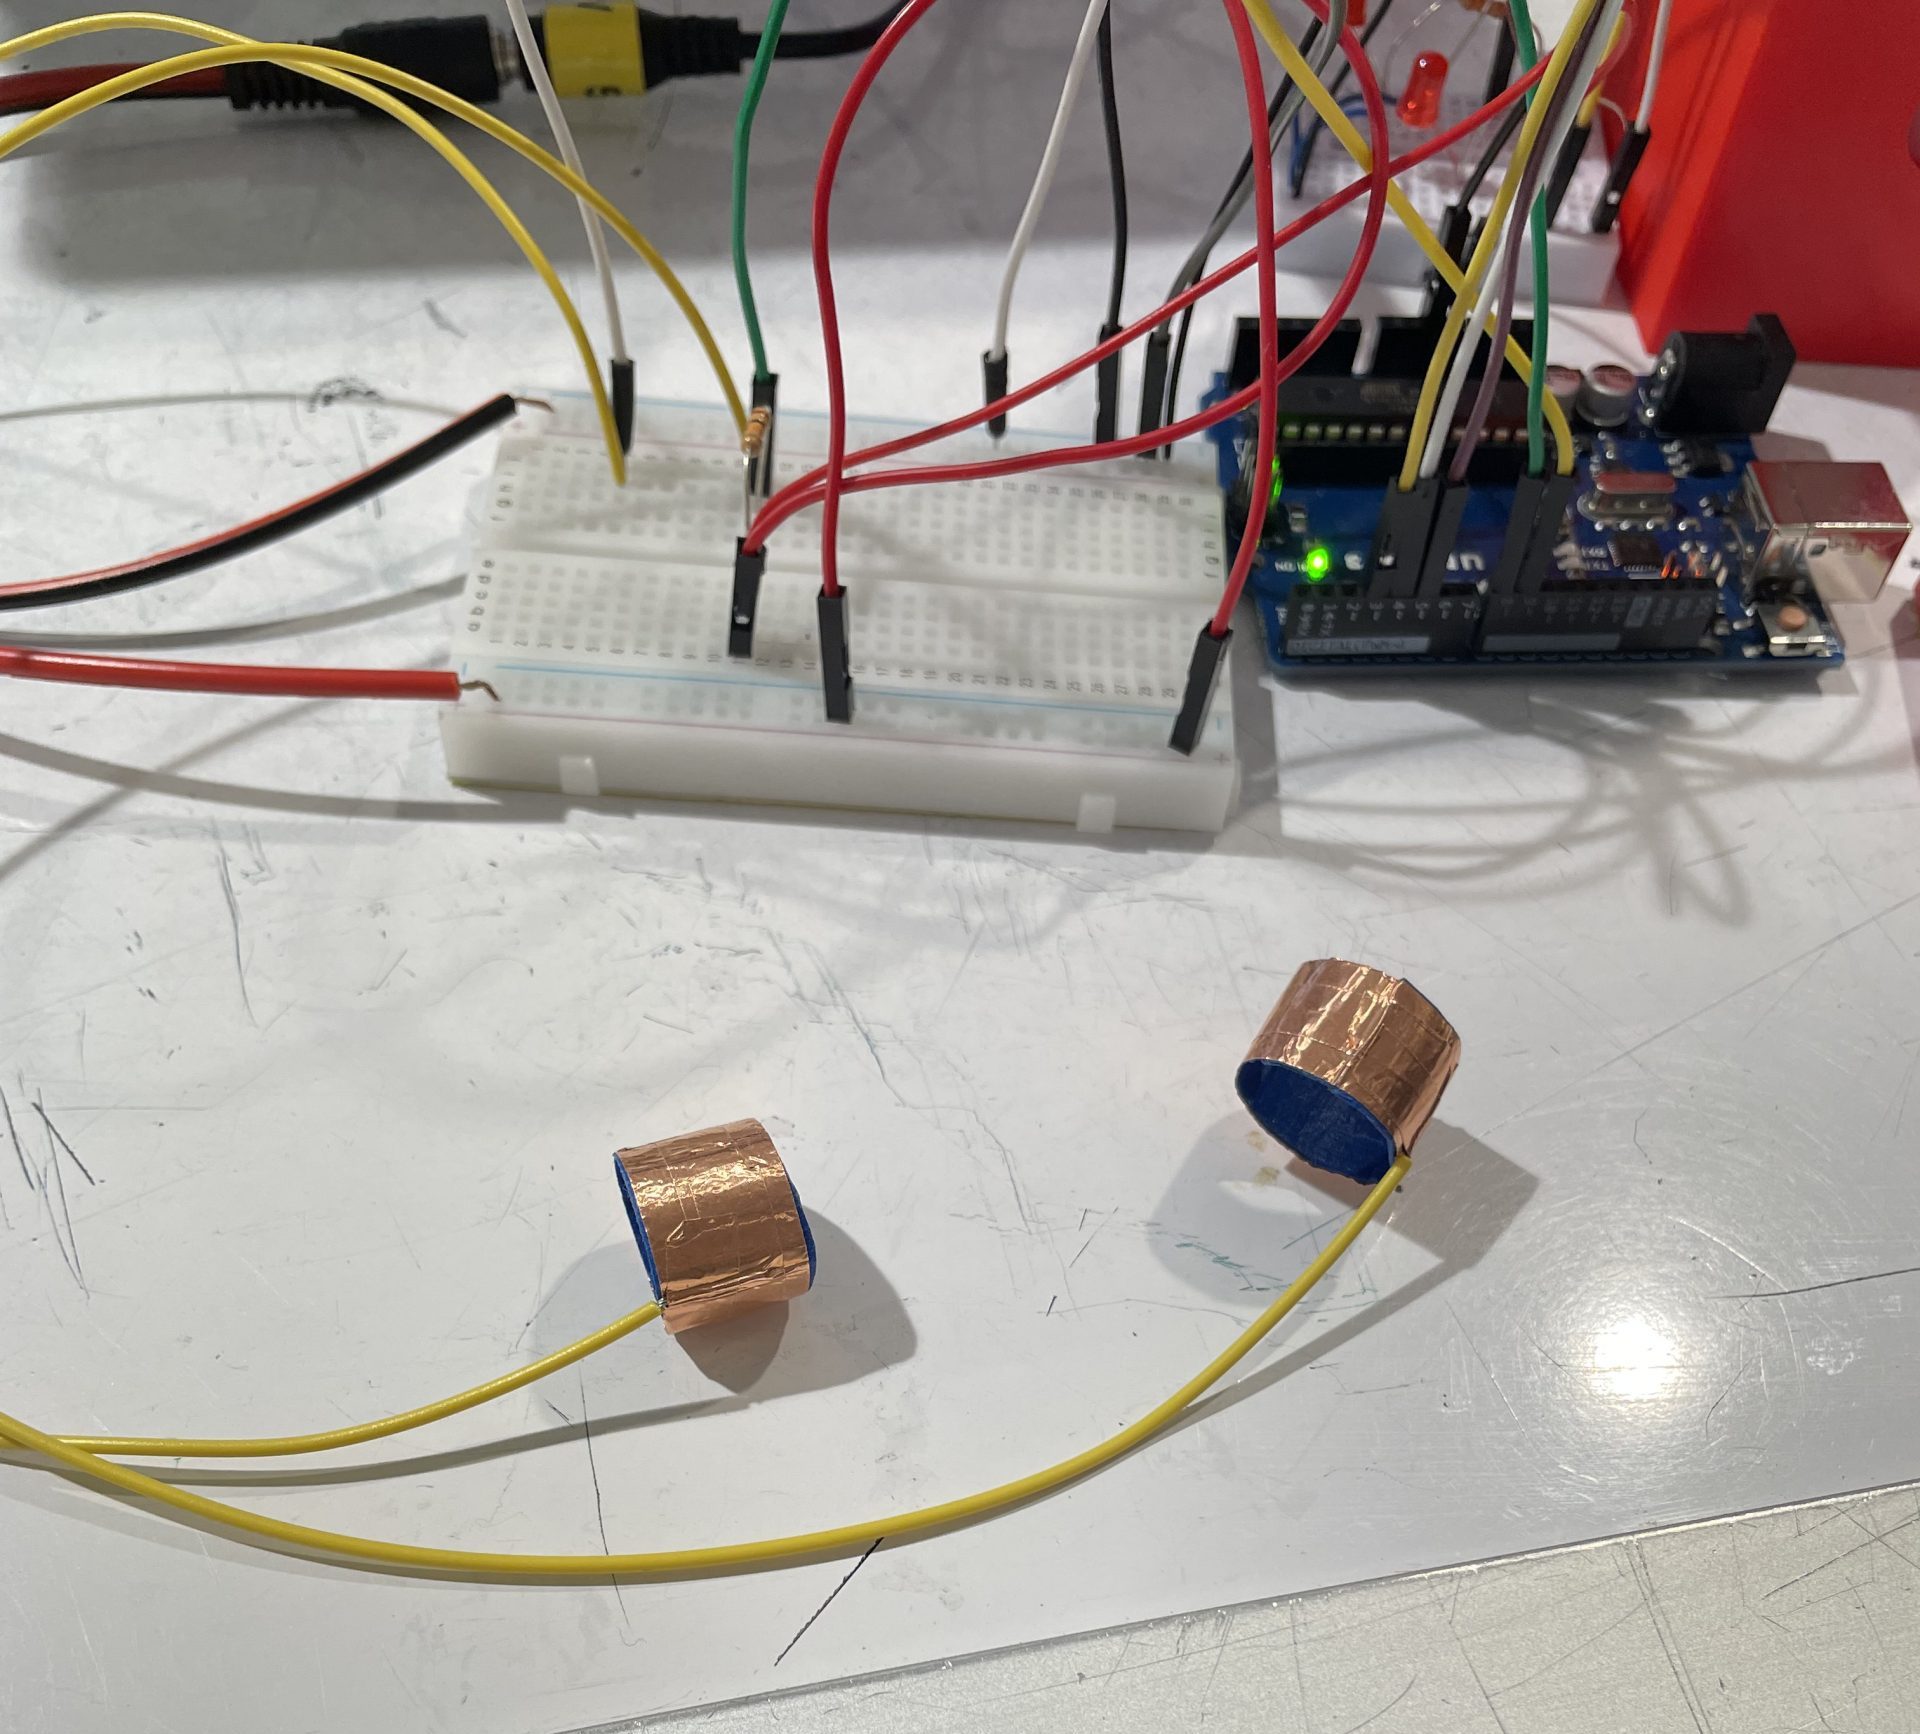 two rings made of copper take attached to wires attached to a switch layout on a breadboard